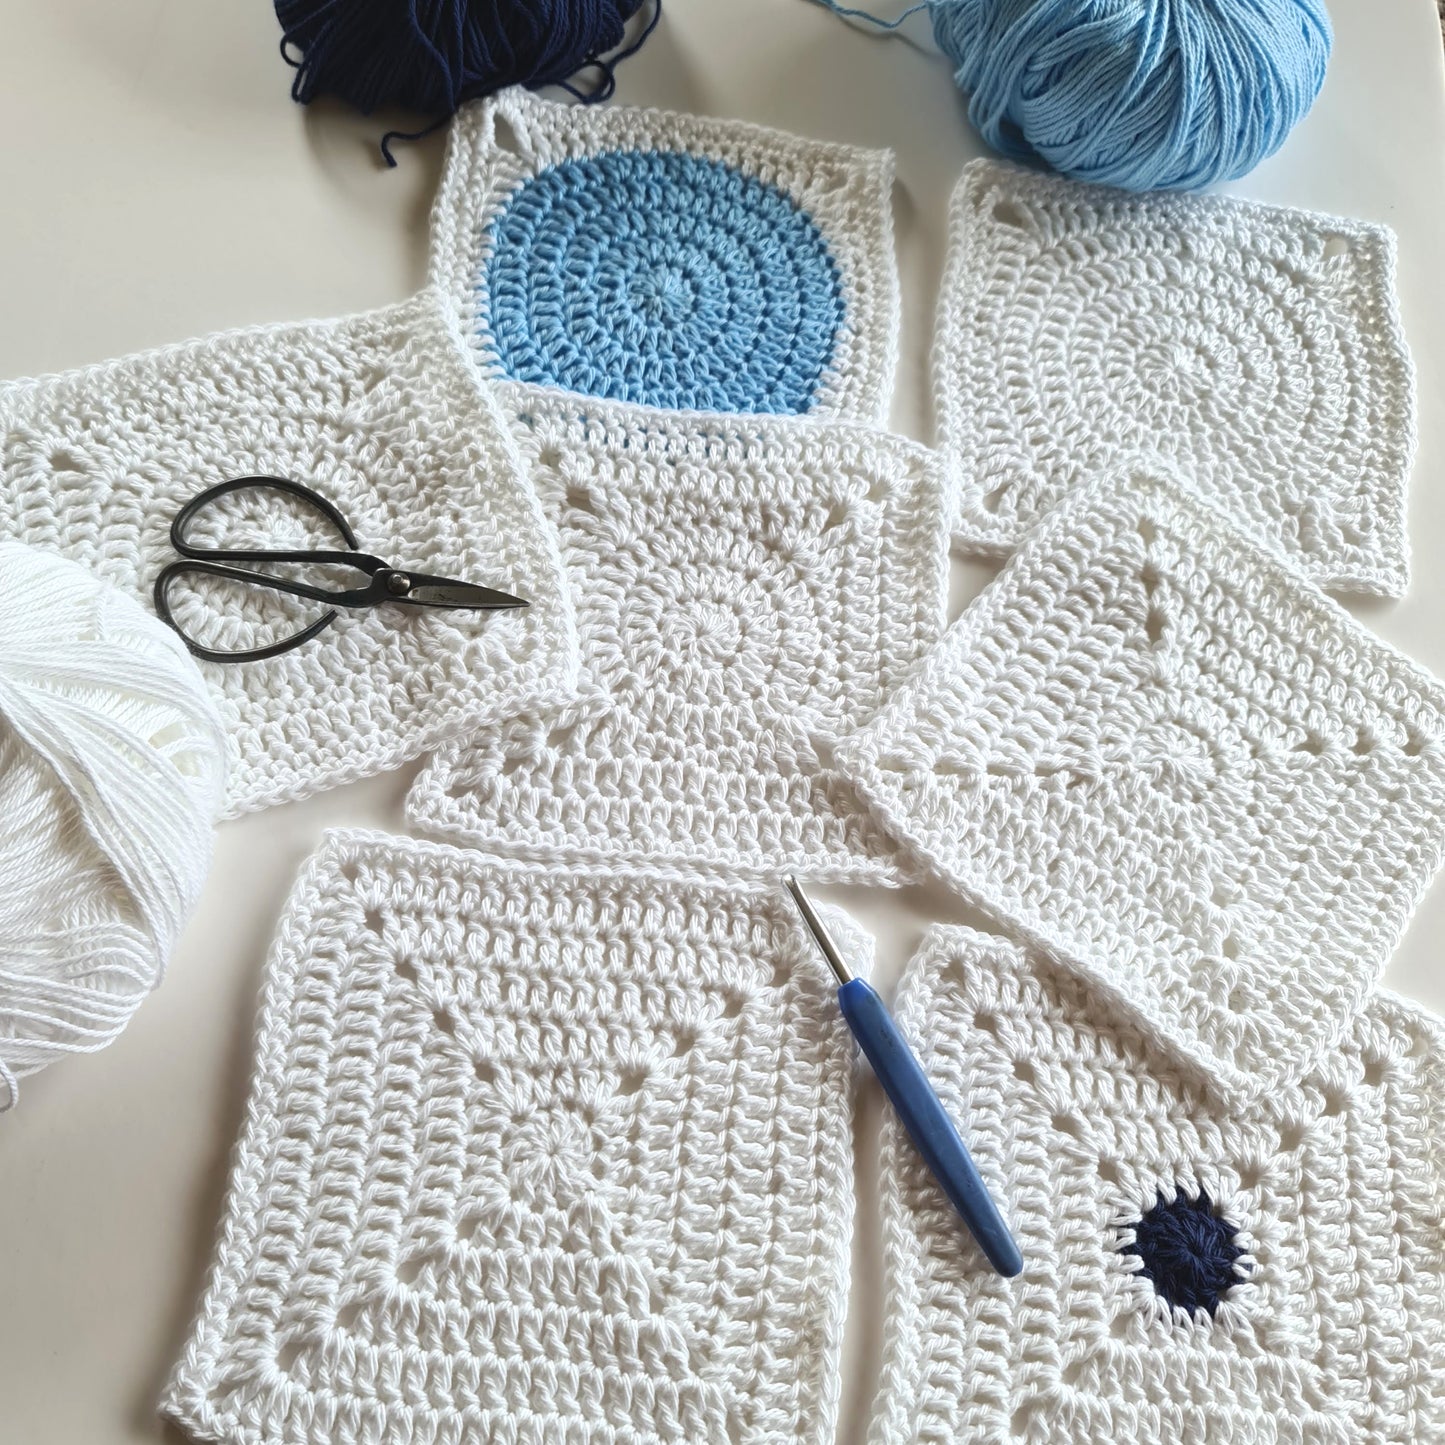 Dotty Spotty granny squares in single colour white with two in blues and white with balls of yarn around them.